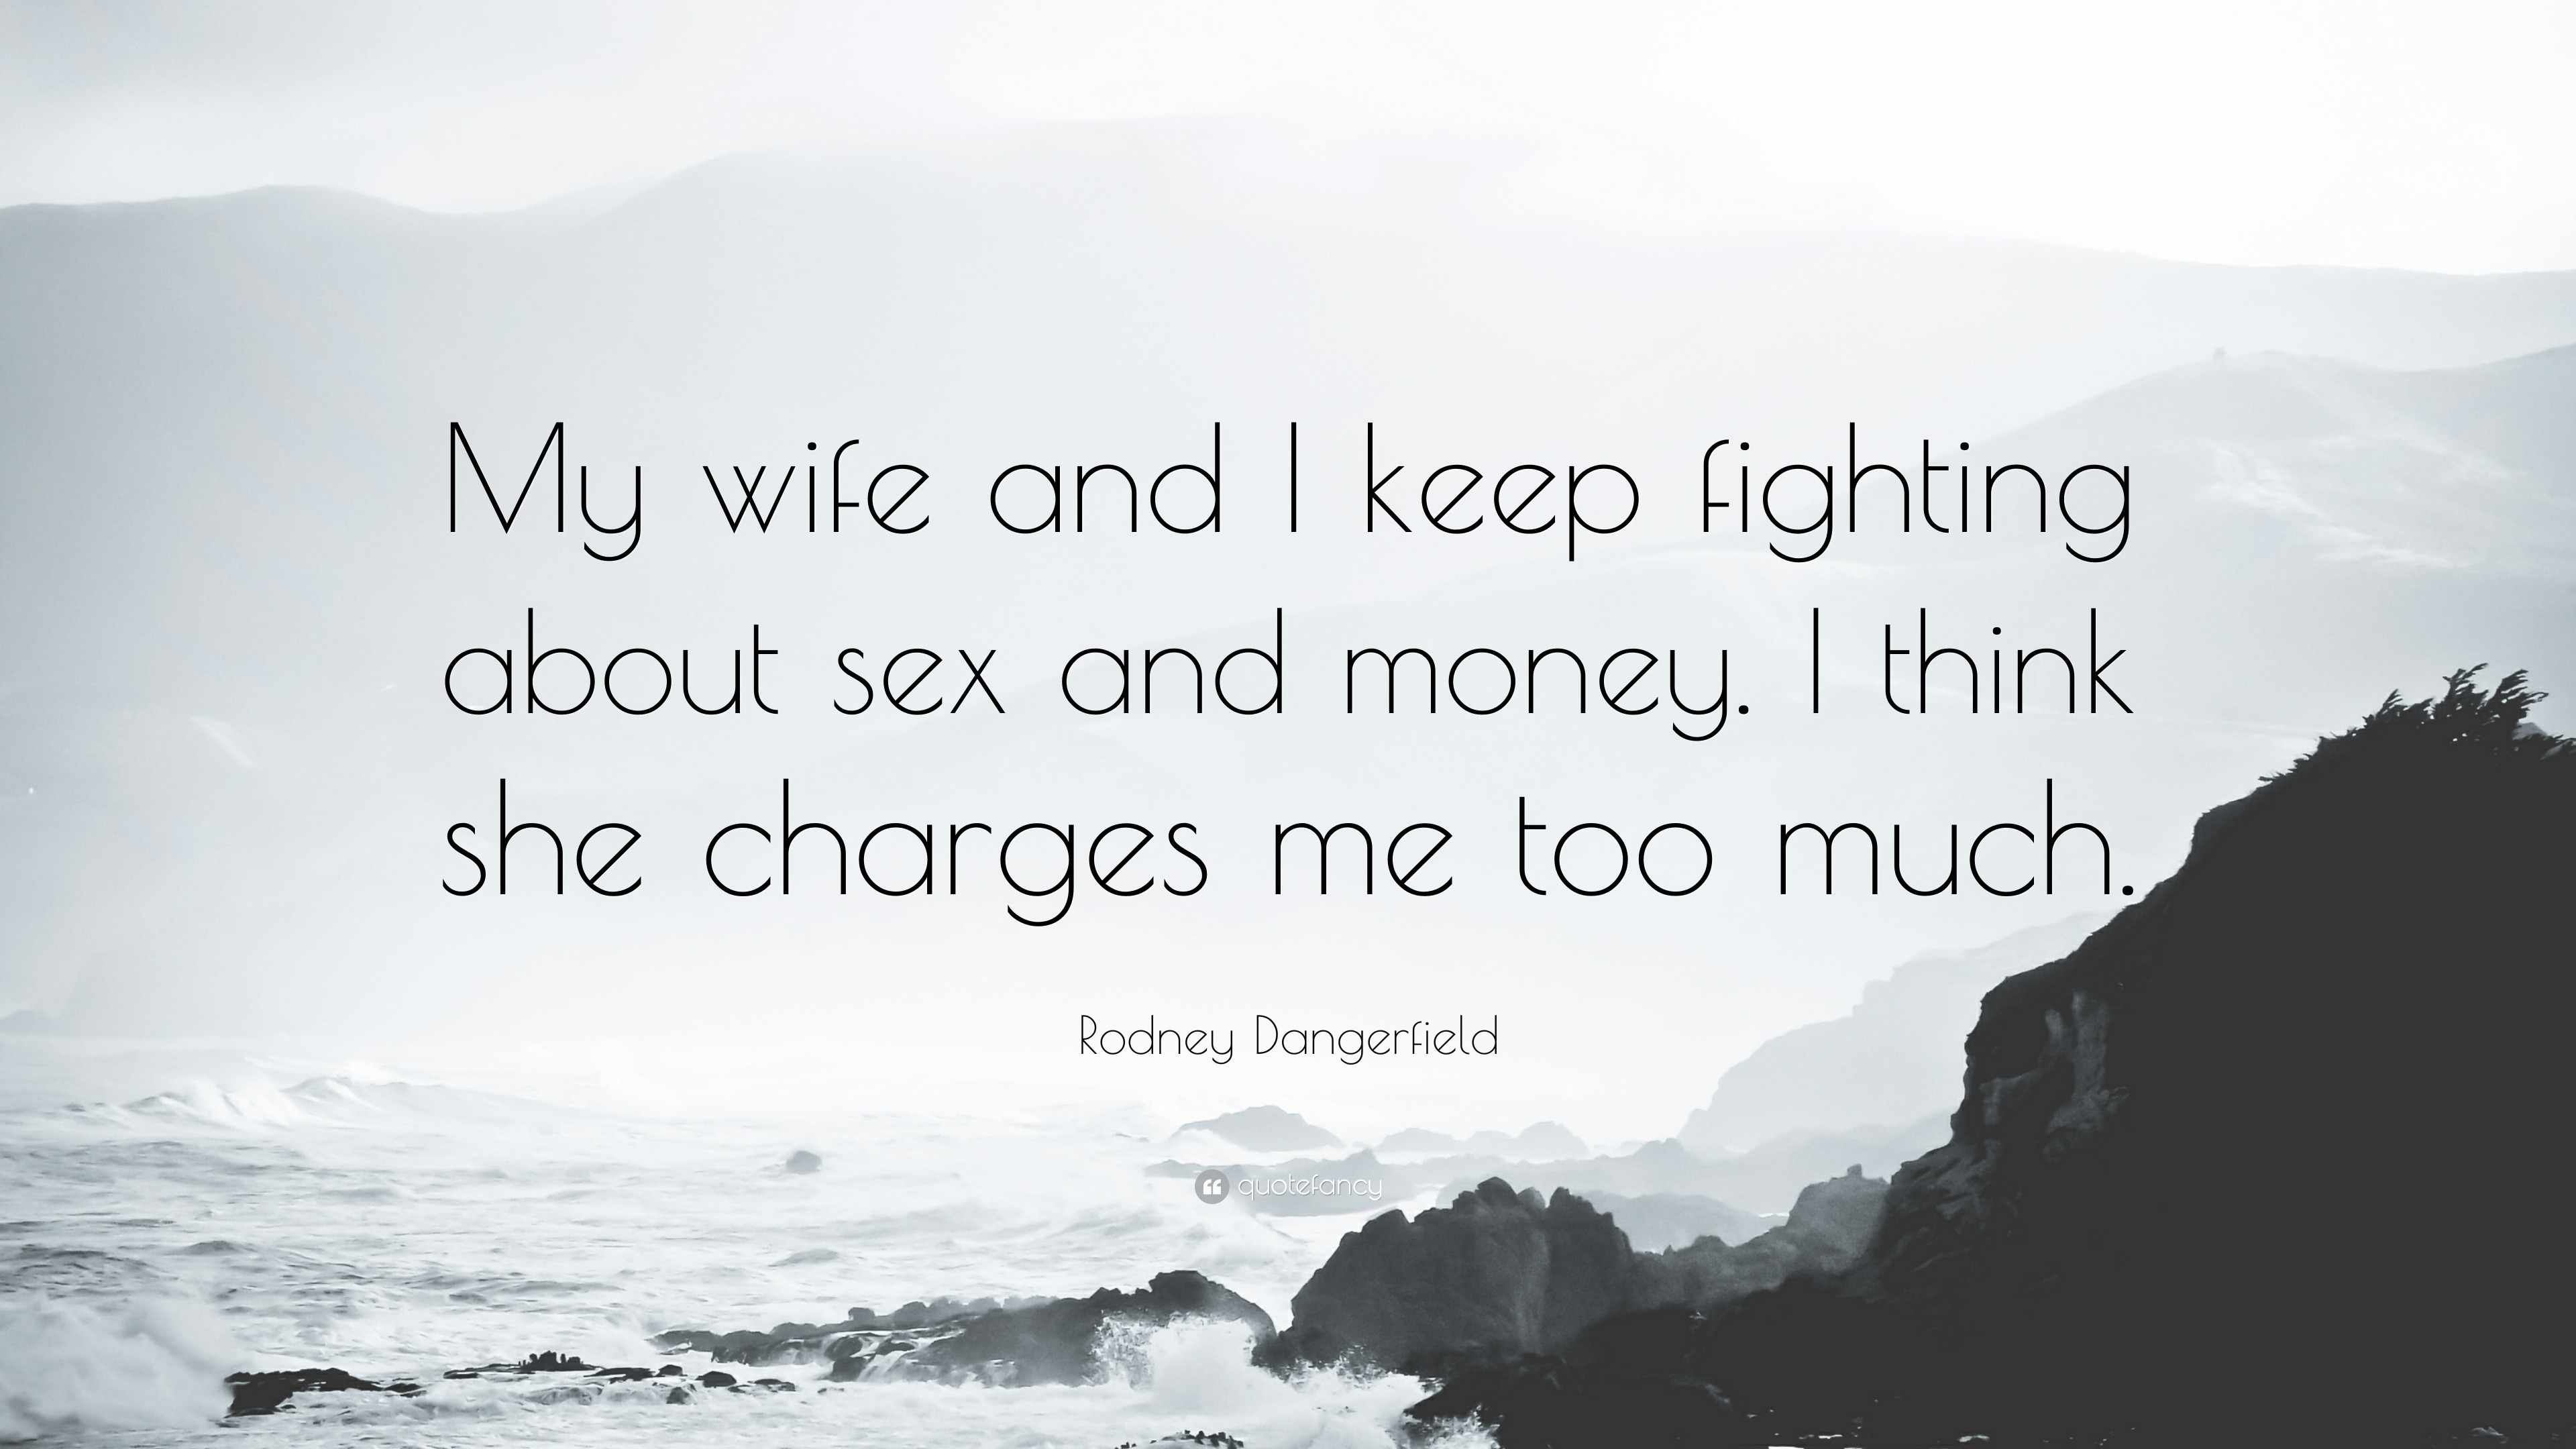 Rodney Dangerfield Quote “My wife and I keep fighting about sex and money picture